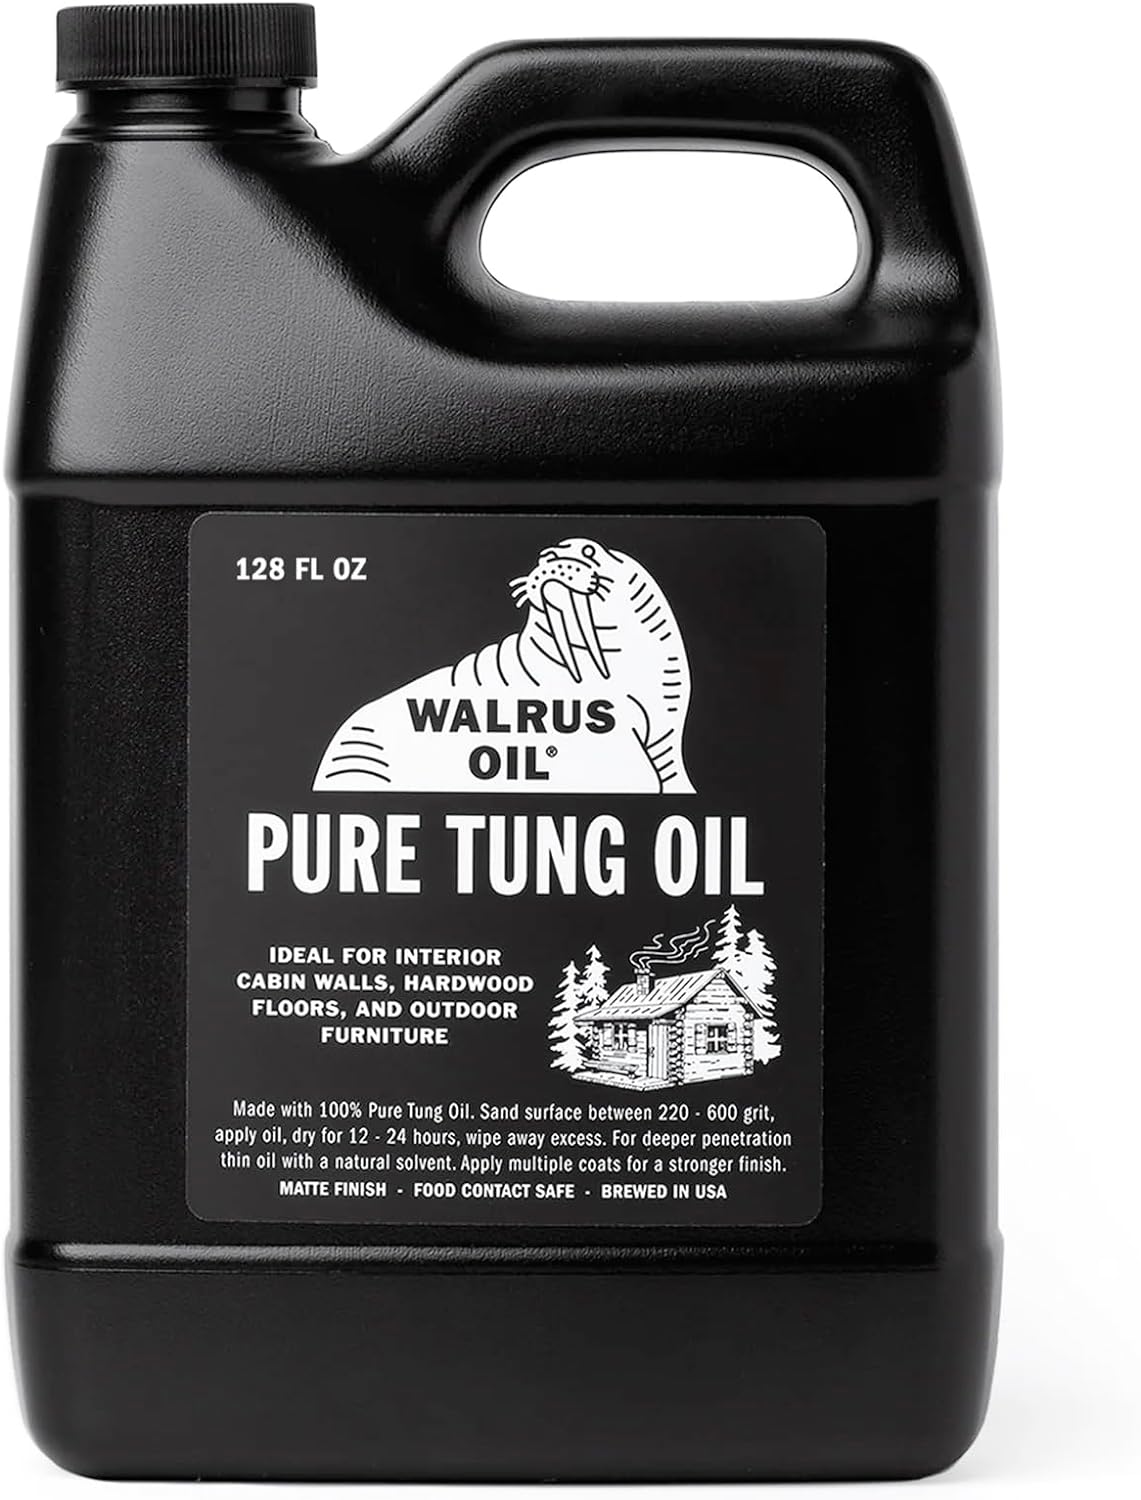 Walrus Oil - Pure Tung Oil, for Any Woodworking Project, 100% Natural, VOC-Free. 128oz / 1 Gallon Jug